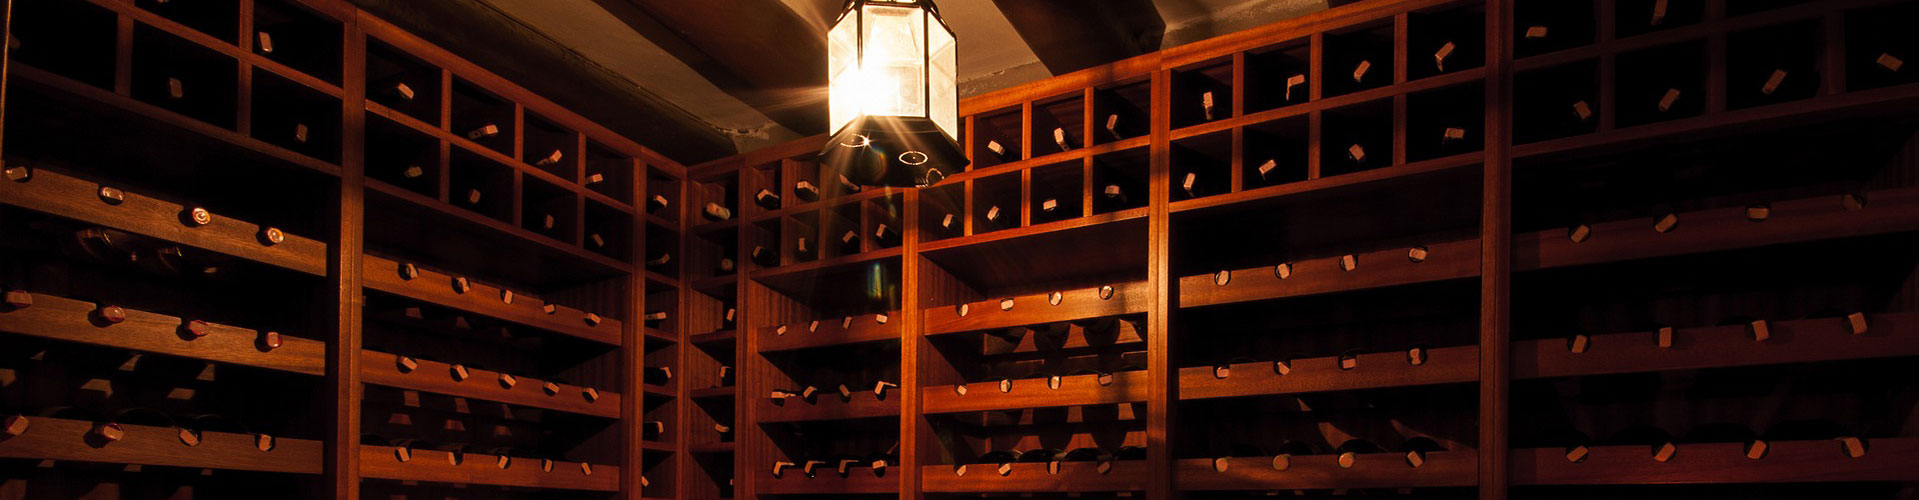 A softly lit wine cellar filled with wine bottles on wooden wine racks.